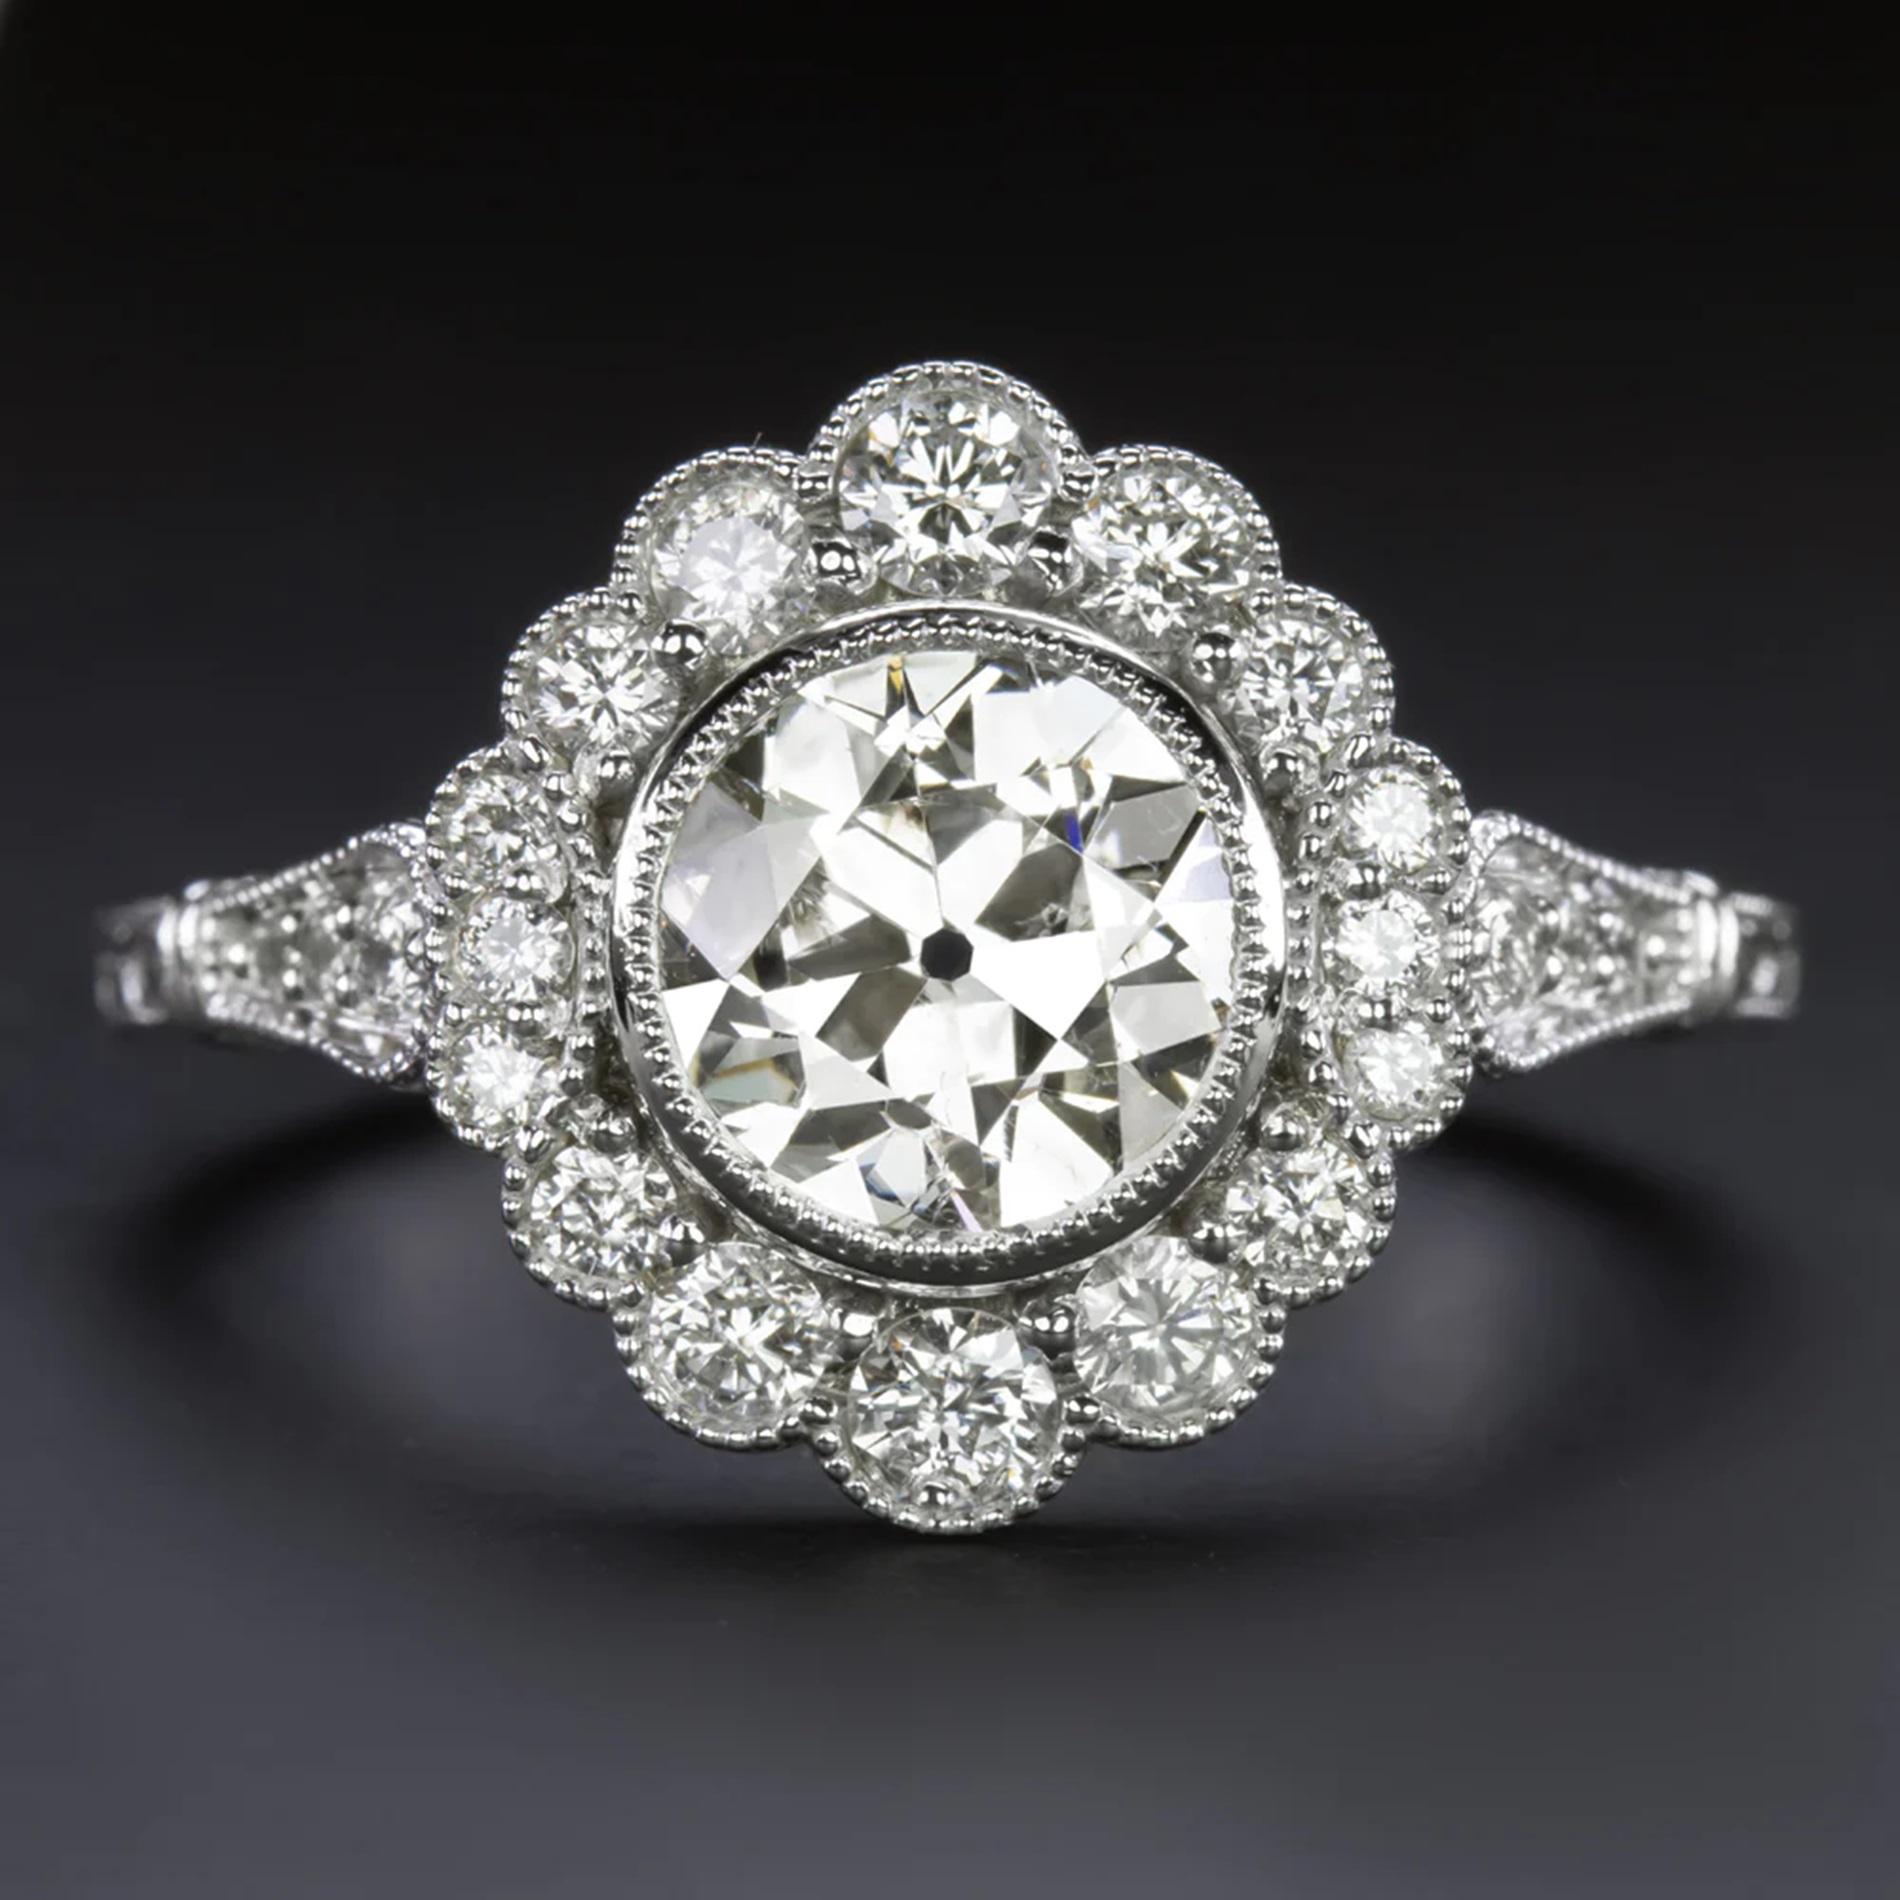 This vintage diamond ring commands attention with its impressive size and a beautifully detailed filigree setting adorned with diamonds. The generous 2-carat round brilliant cut center diamond captivates with its eye-catching size and dazzling